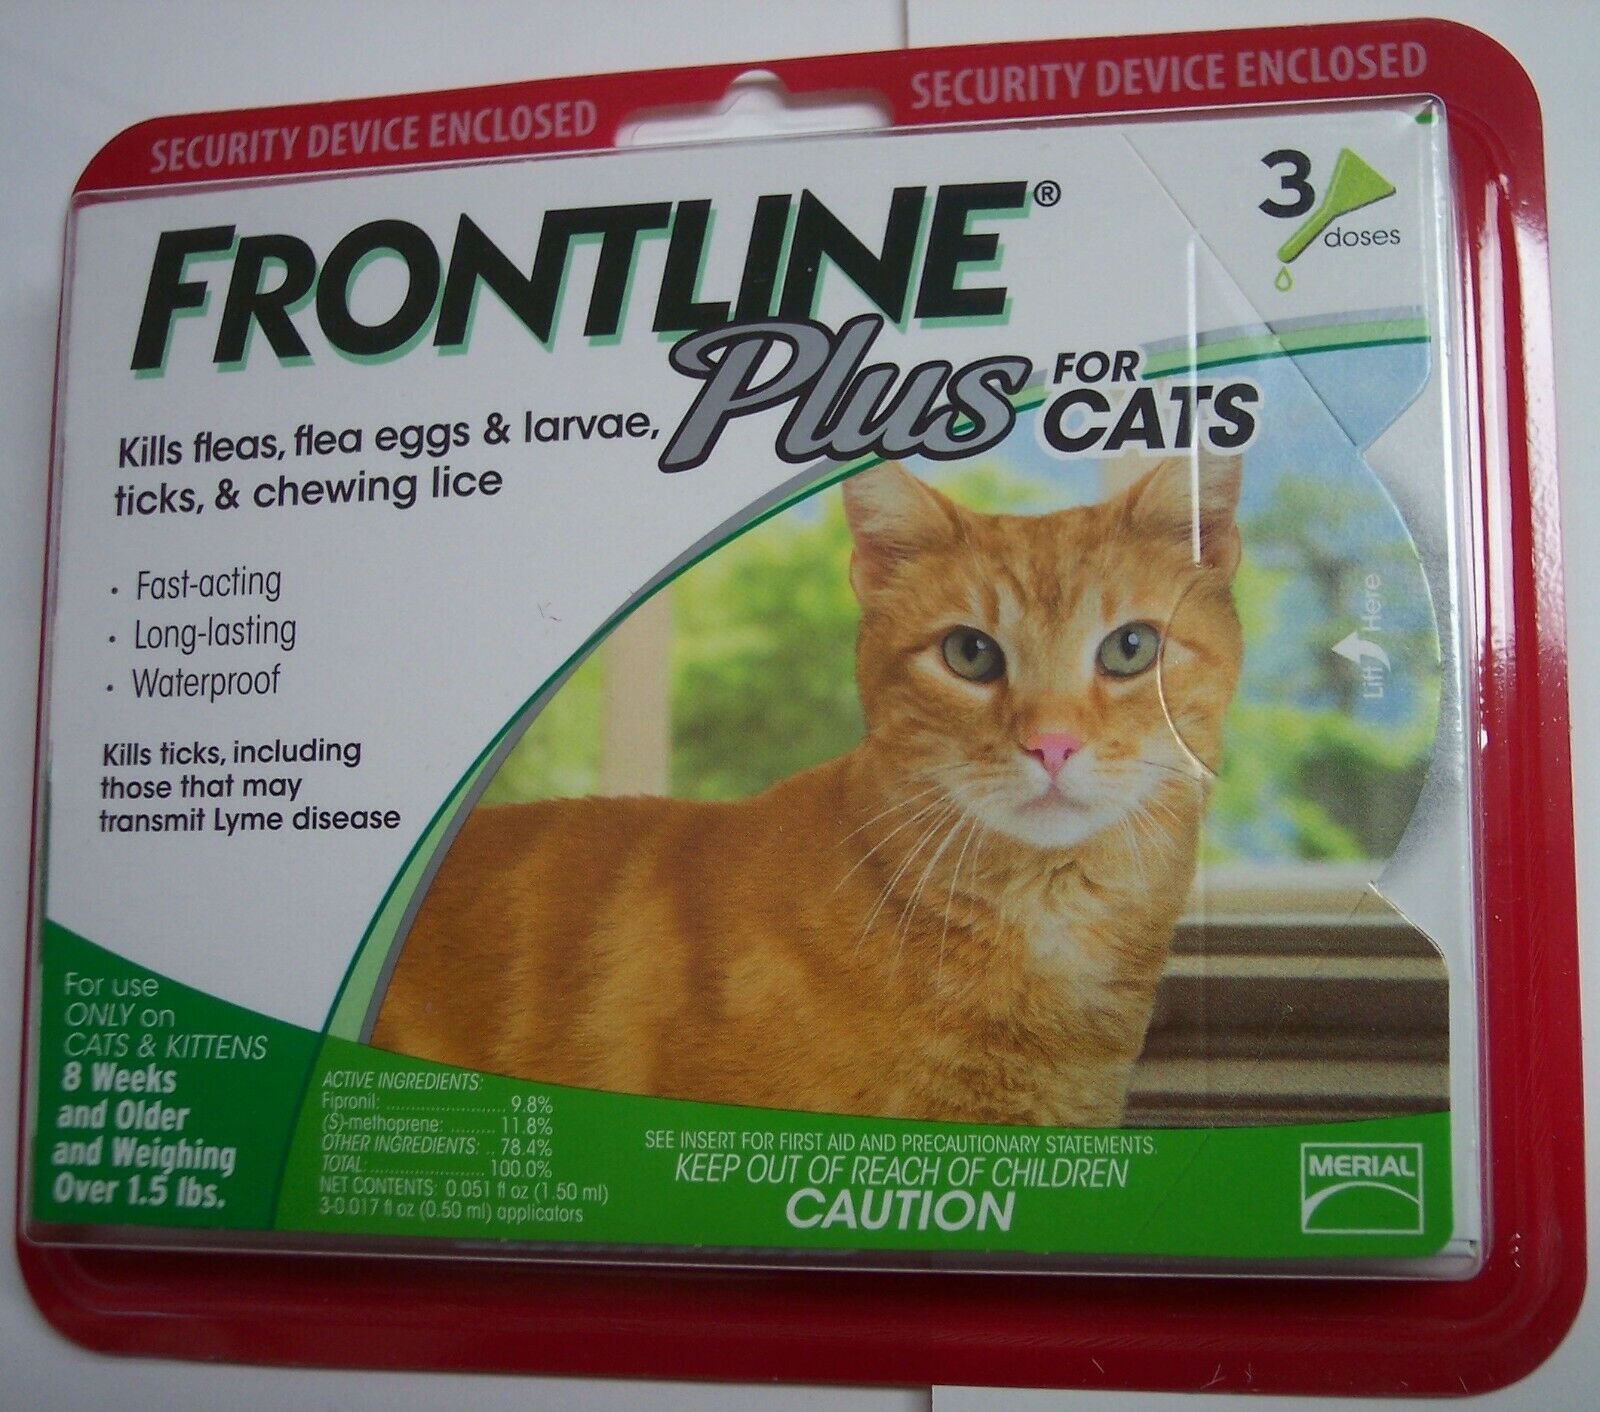 Frontline Plus Flea & Tick Control For Cats, Kittens Over 1.5 Lbs (3 Dose Box)